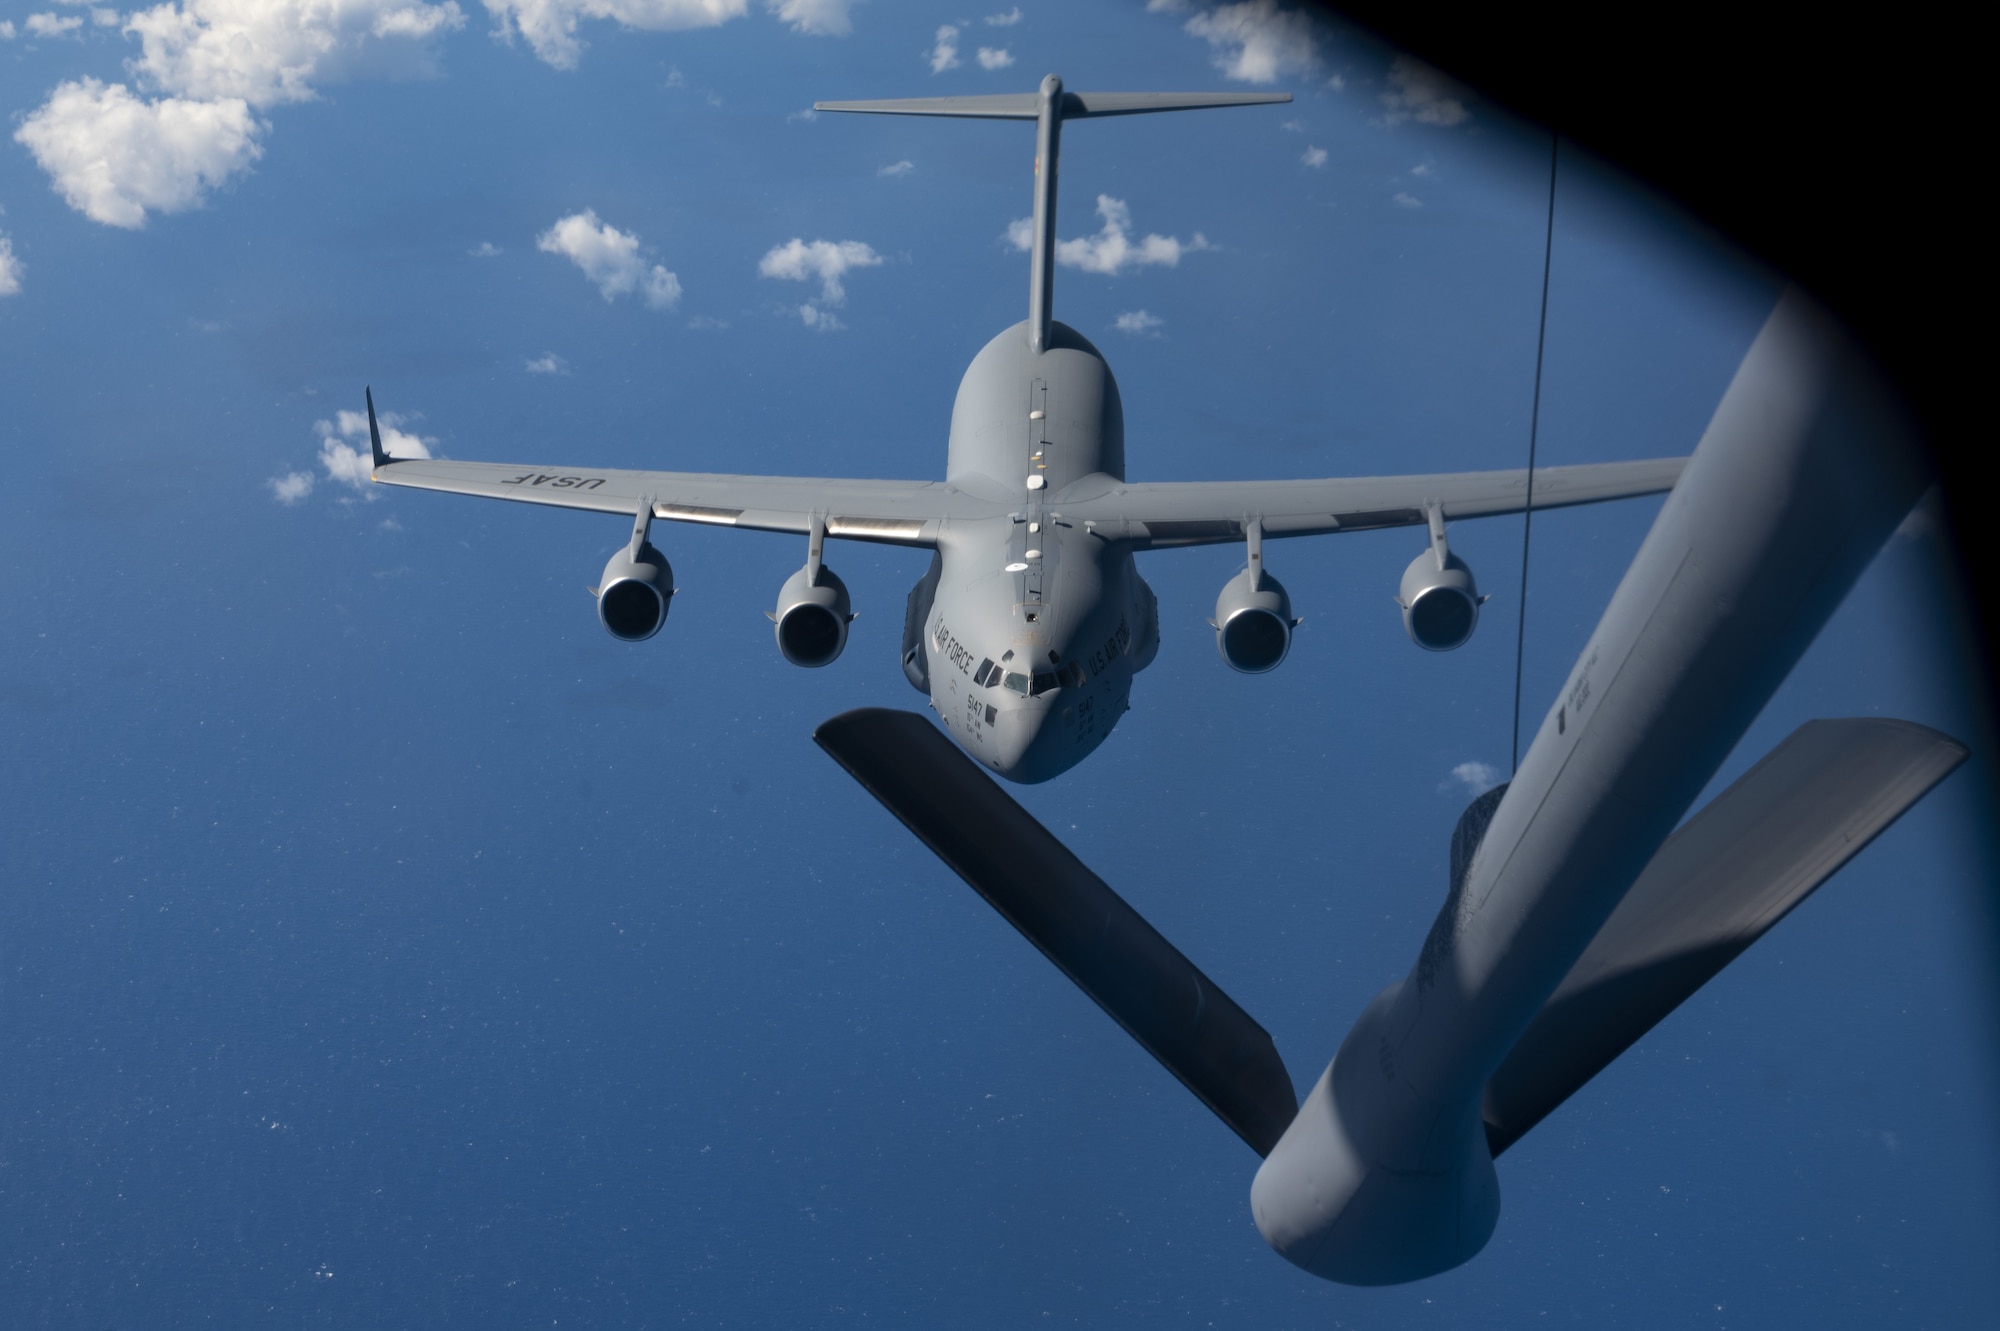 A U.S. Air Force C-17 Globemaster III  aircraft is refueled by a KC-135 Stratotanker aircraft from Fairchild Air Force Base, Washington, over the Pacific Ocean, Nov. 21, 2022. The completion of this cargo mission enabled Team Fairchild to improve the skills and knowledge of its crews, and ensure they can continue sustain rapid global mobility as the Air Force’s premier air refueling wing. (U.S. Air Force photo by Staff Sgt. Lawrence Sena)